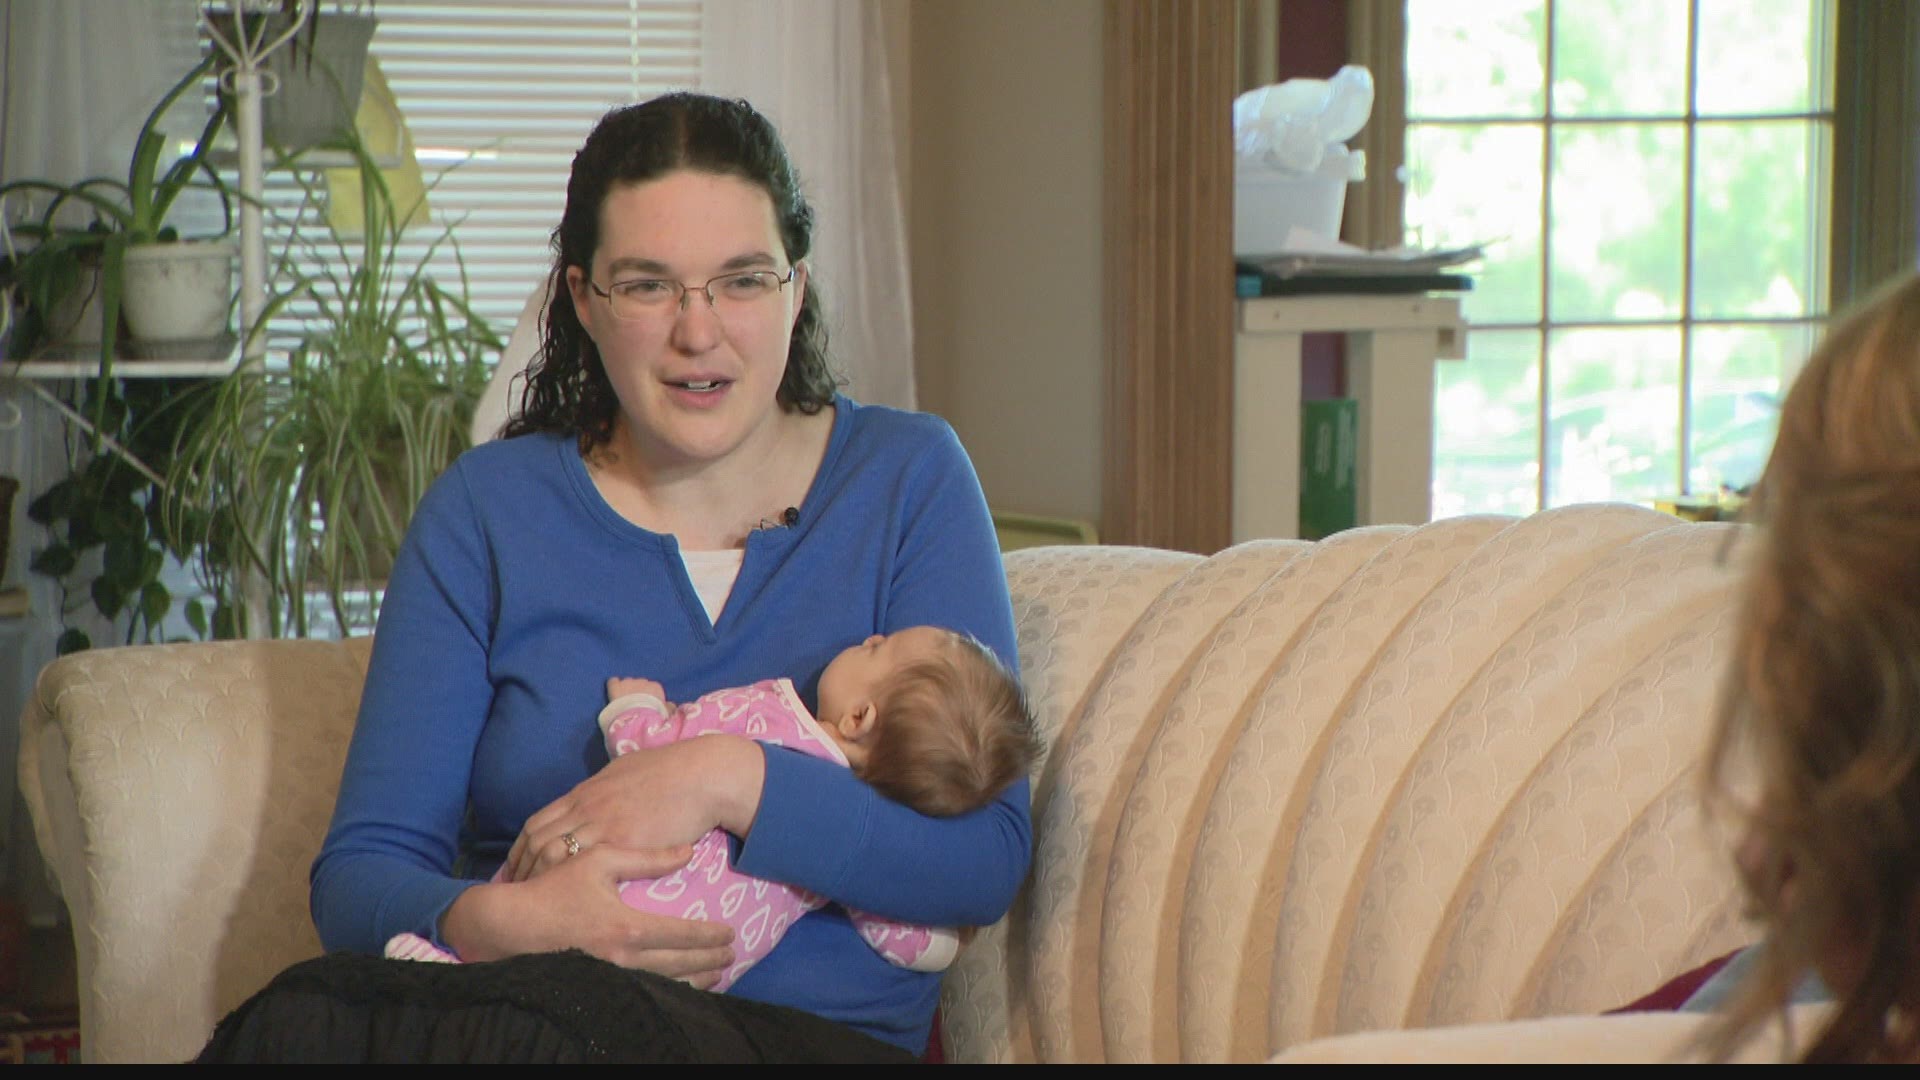 Indiana Lawmaker Takes Action After Breastfeeding Mom Called For Jury